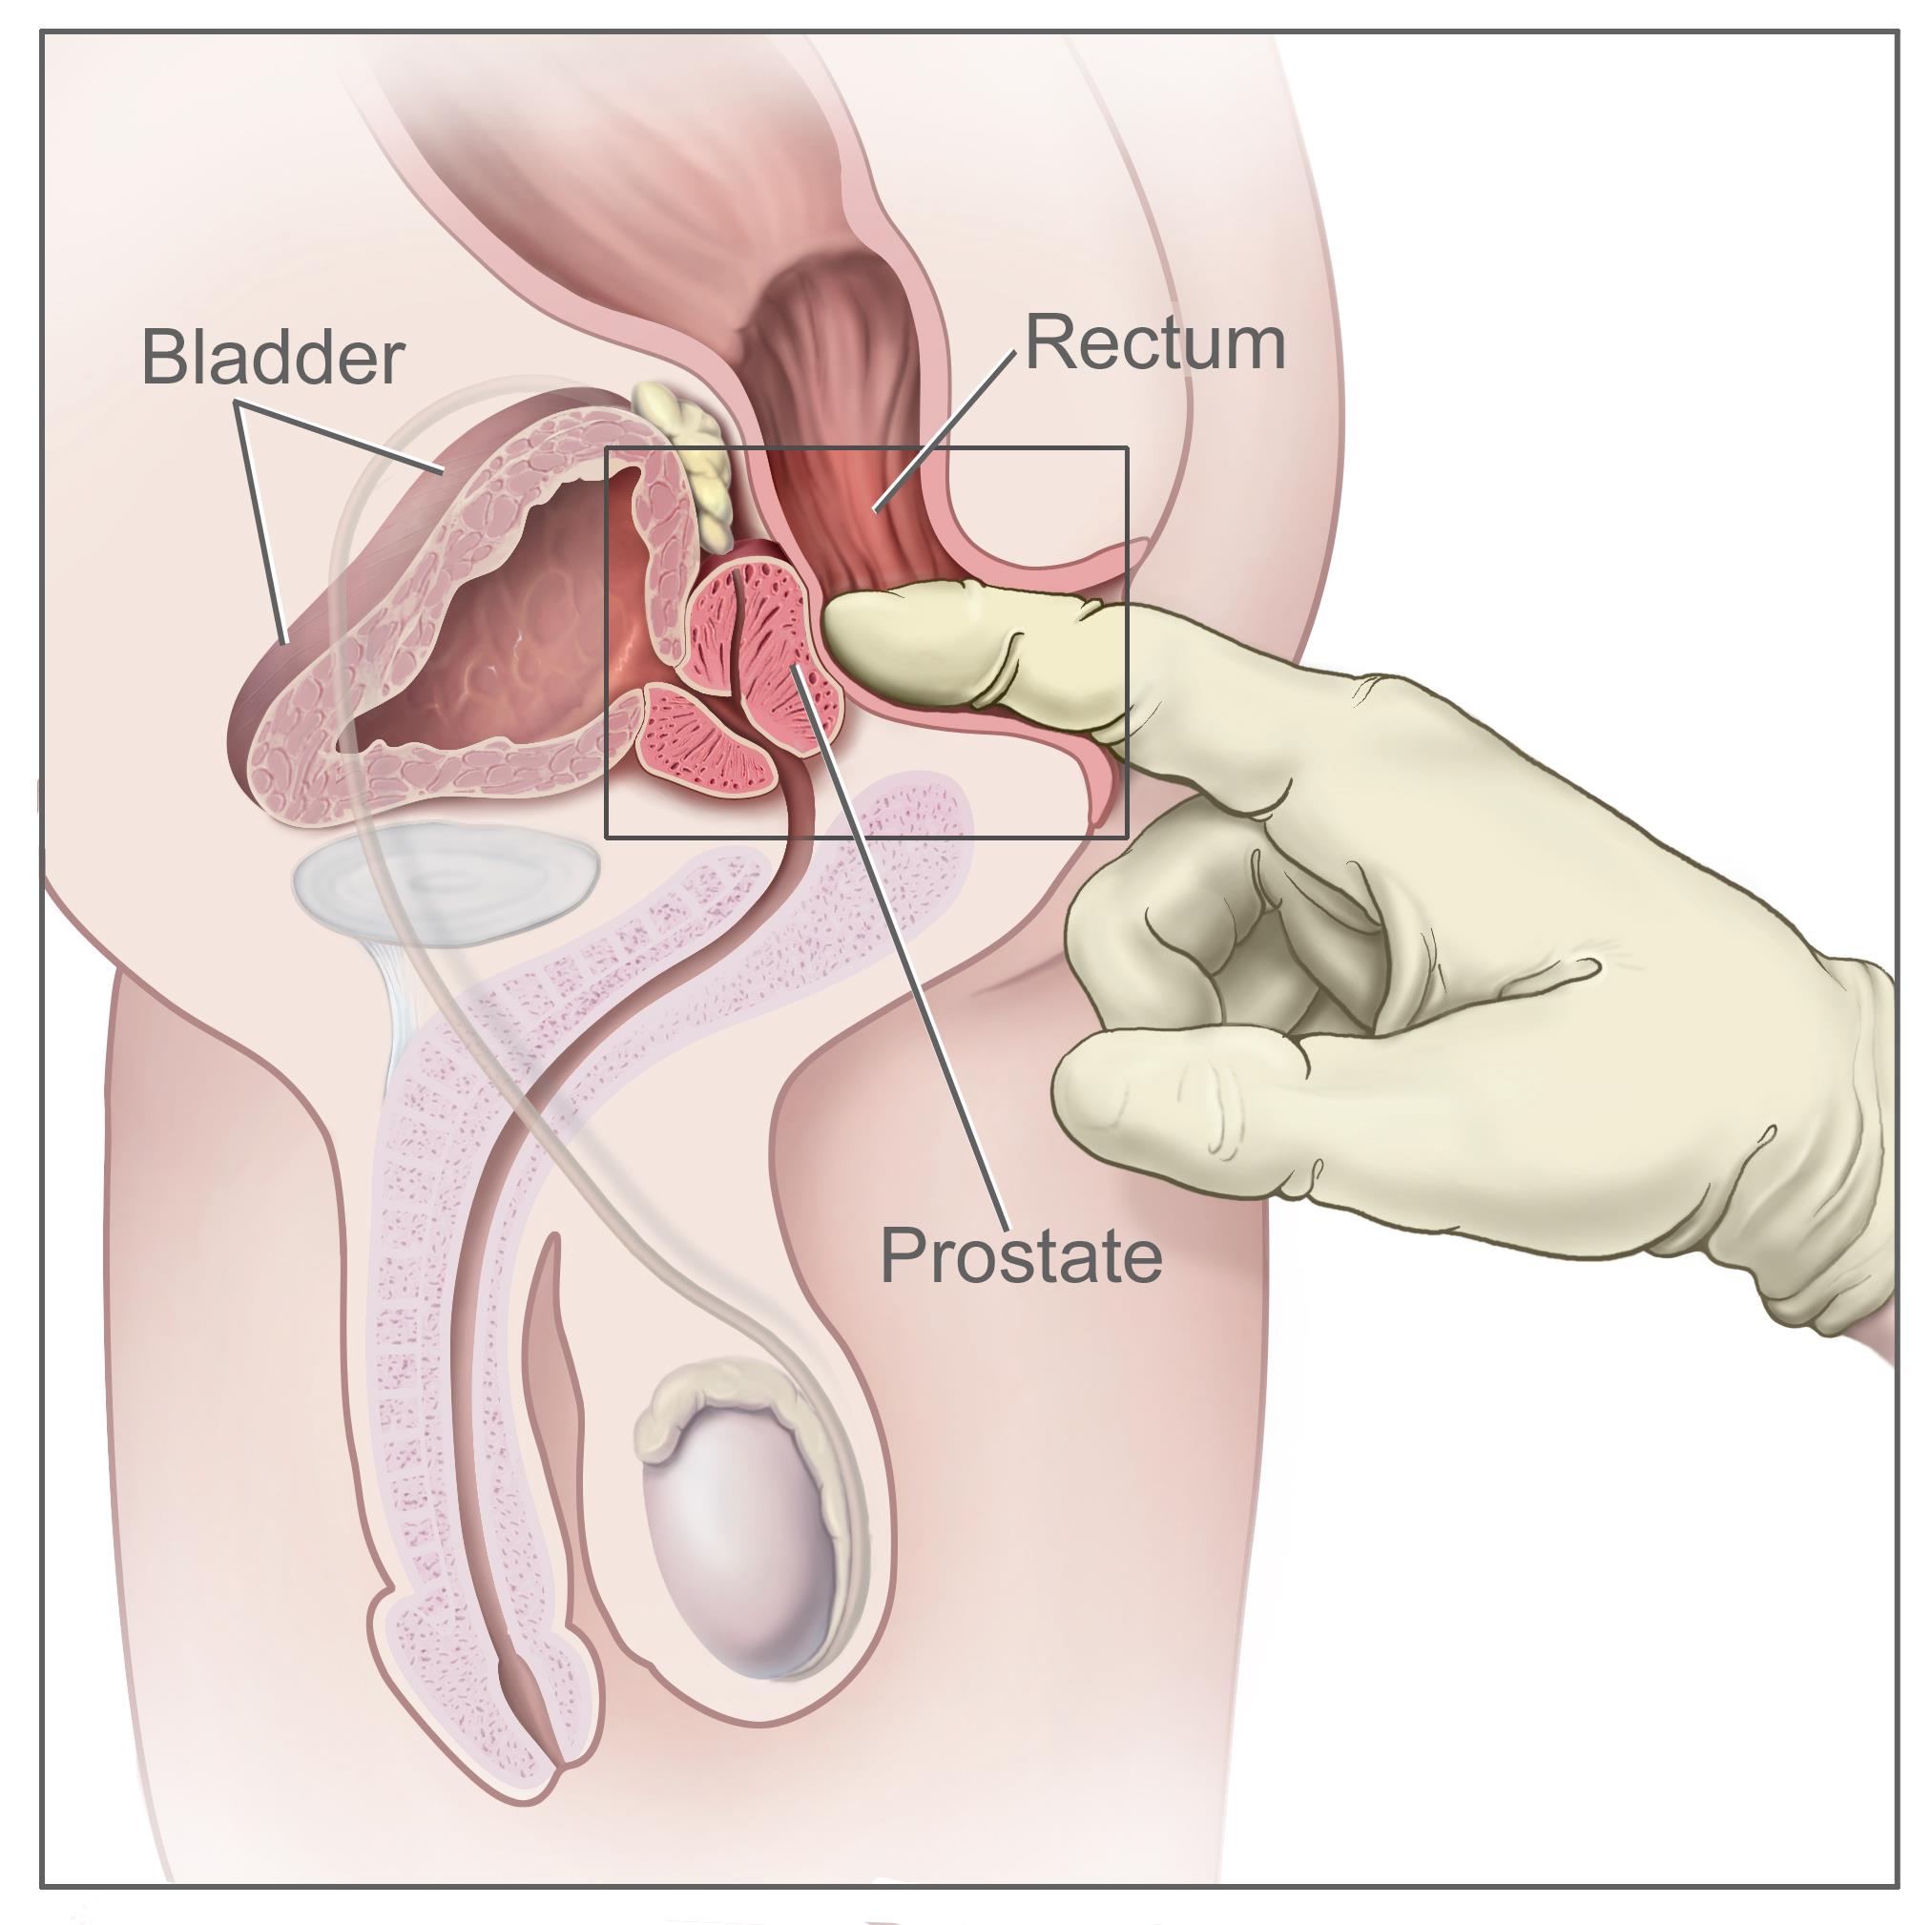  symptoms of prostate cancer stage 2 symptoms of prostate cancer are symptoms of prostate cancer are similar to symptoms of prostate cancer after prostatectomy